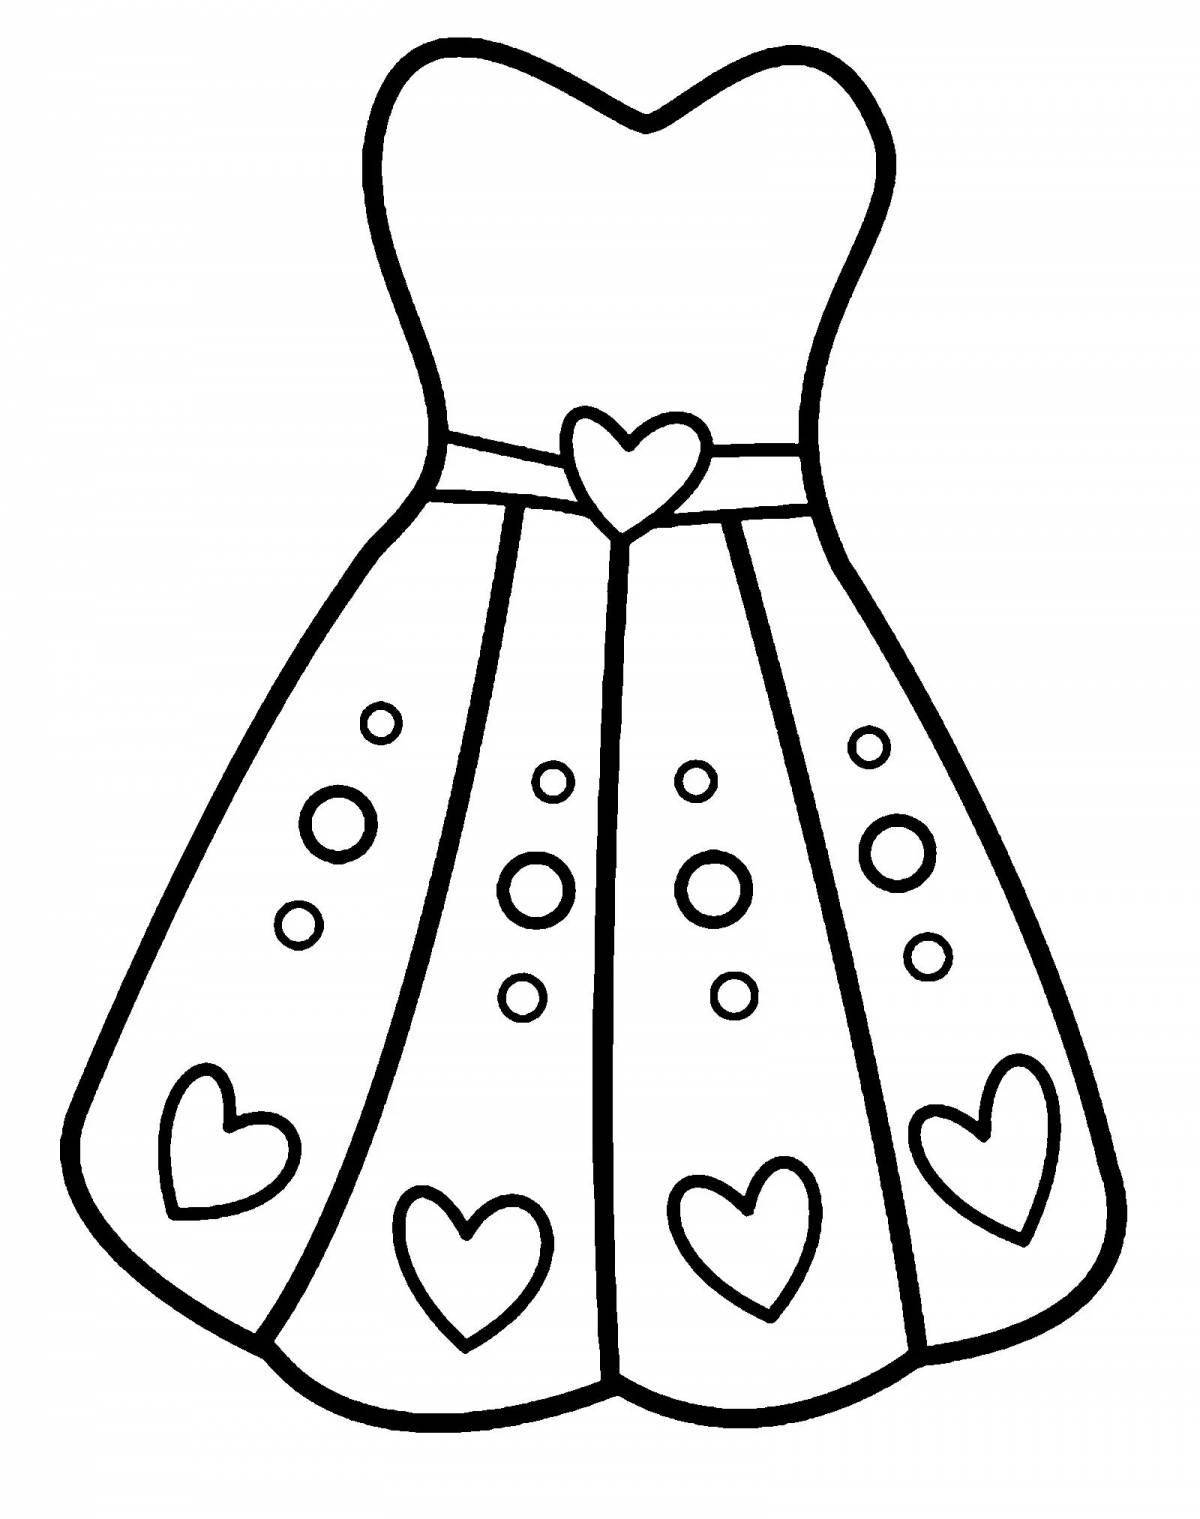 Coloring book exquisite dress pattern